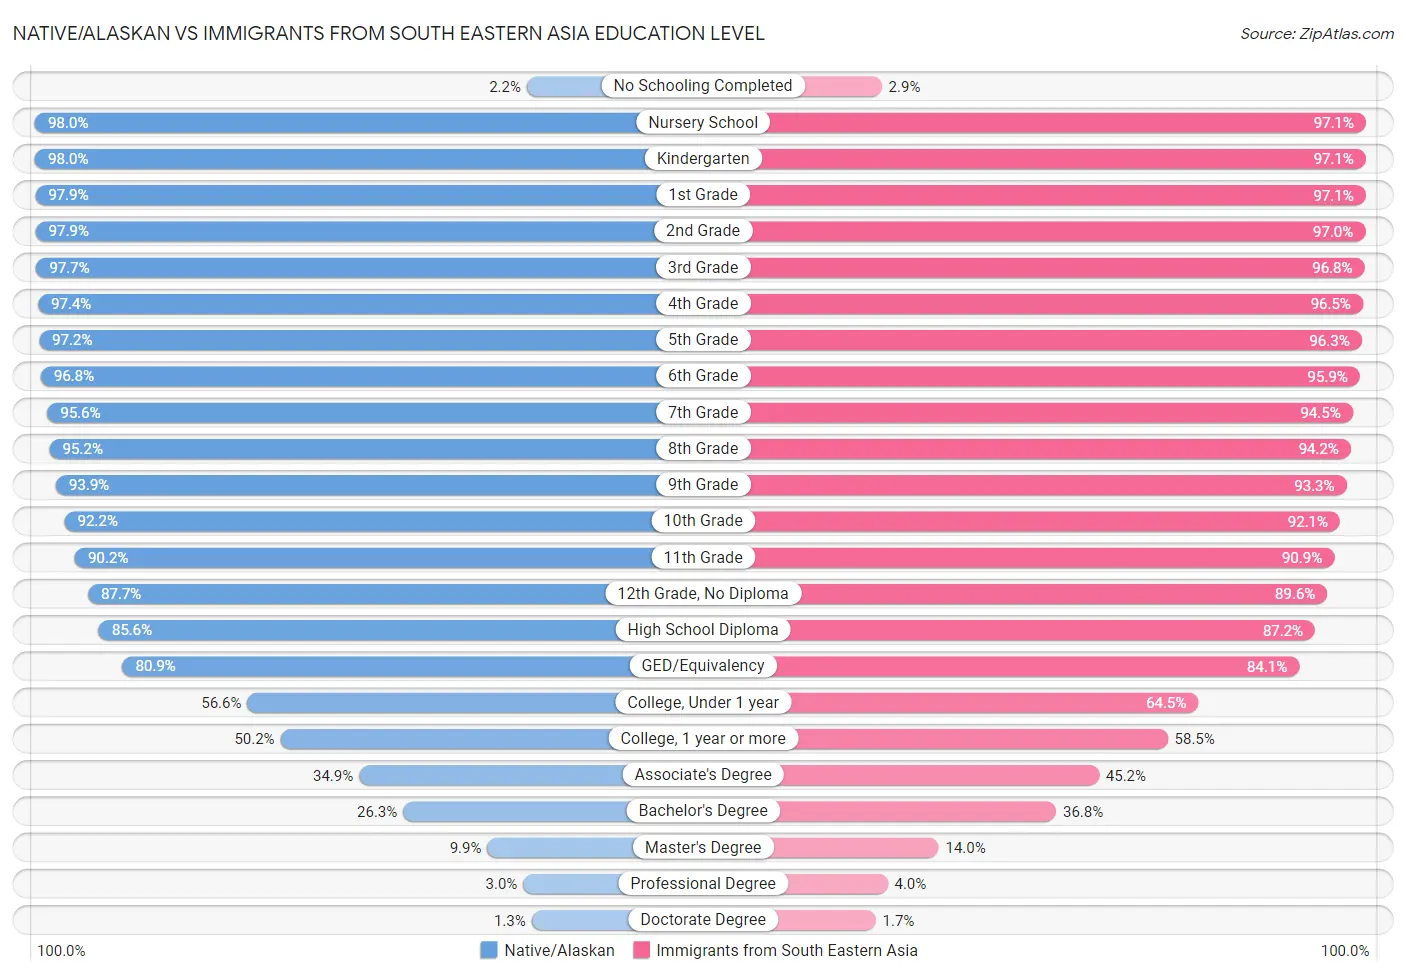 Native/Alaskan vs Immigrants from South Eastern Asia Education Level